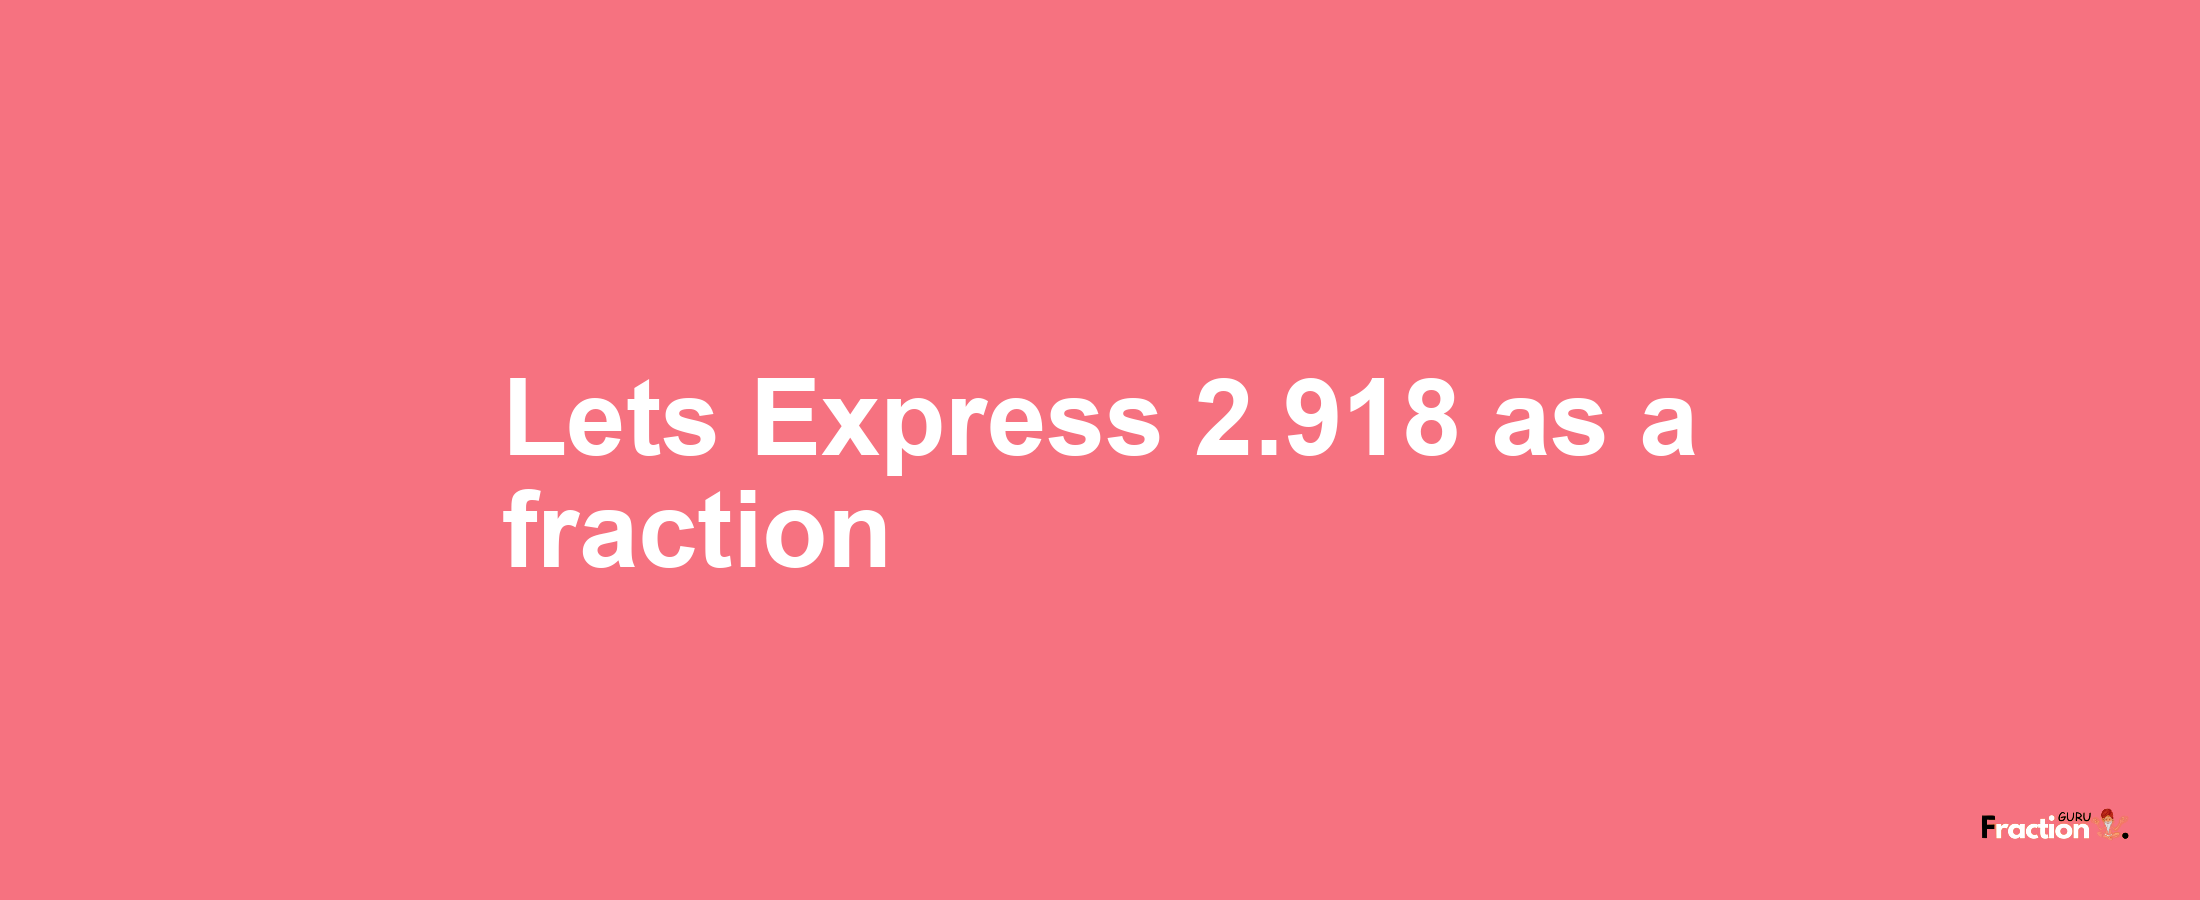 Lets Express 2.918 as afraction